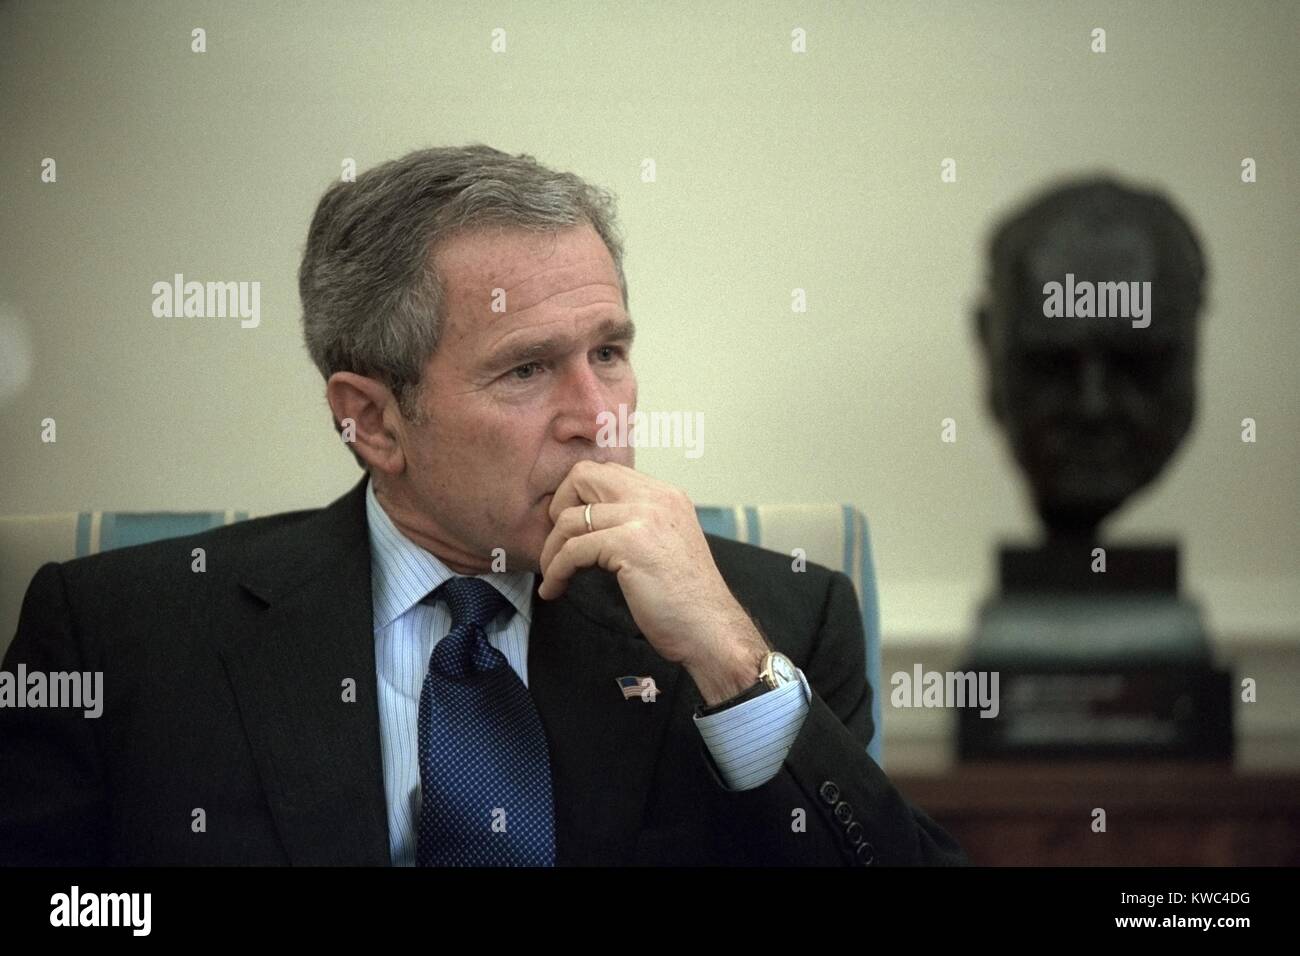 President George W. Bush during a meeting in the Oval Office of the White House. Oct. 10, 2001. In the background is a bust of Winston Churchill. Operation Enduring Freedom combat in Afghanistan started three days earlier on October 7, 2001. (BSLOC 2015 2 173) Stock Photo